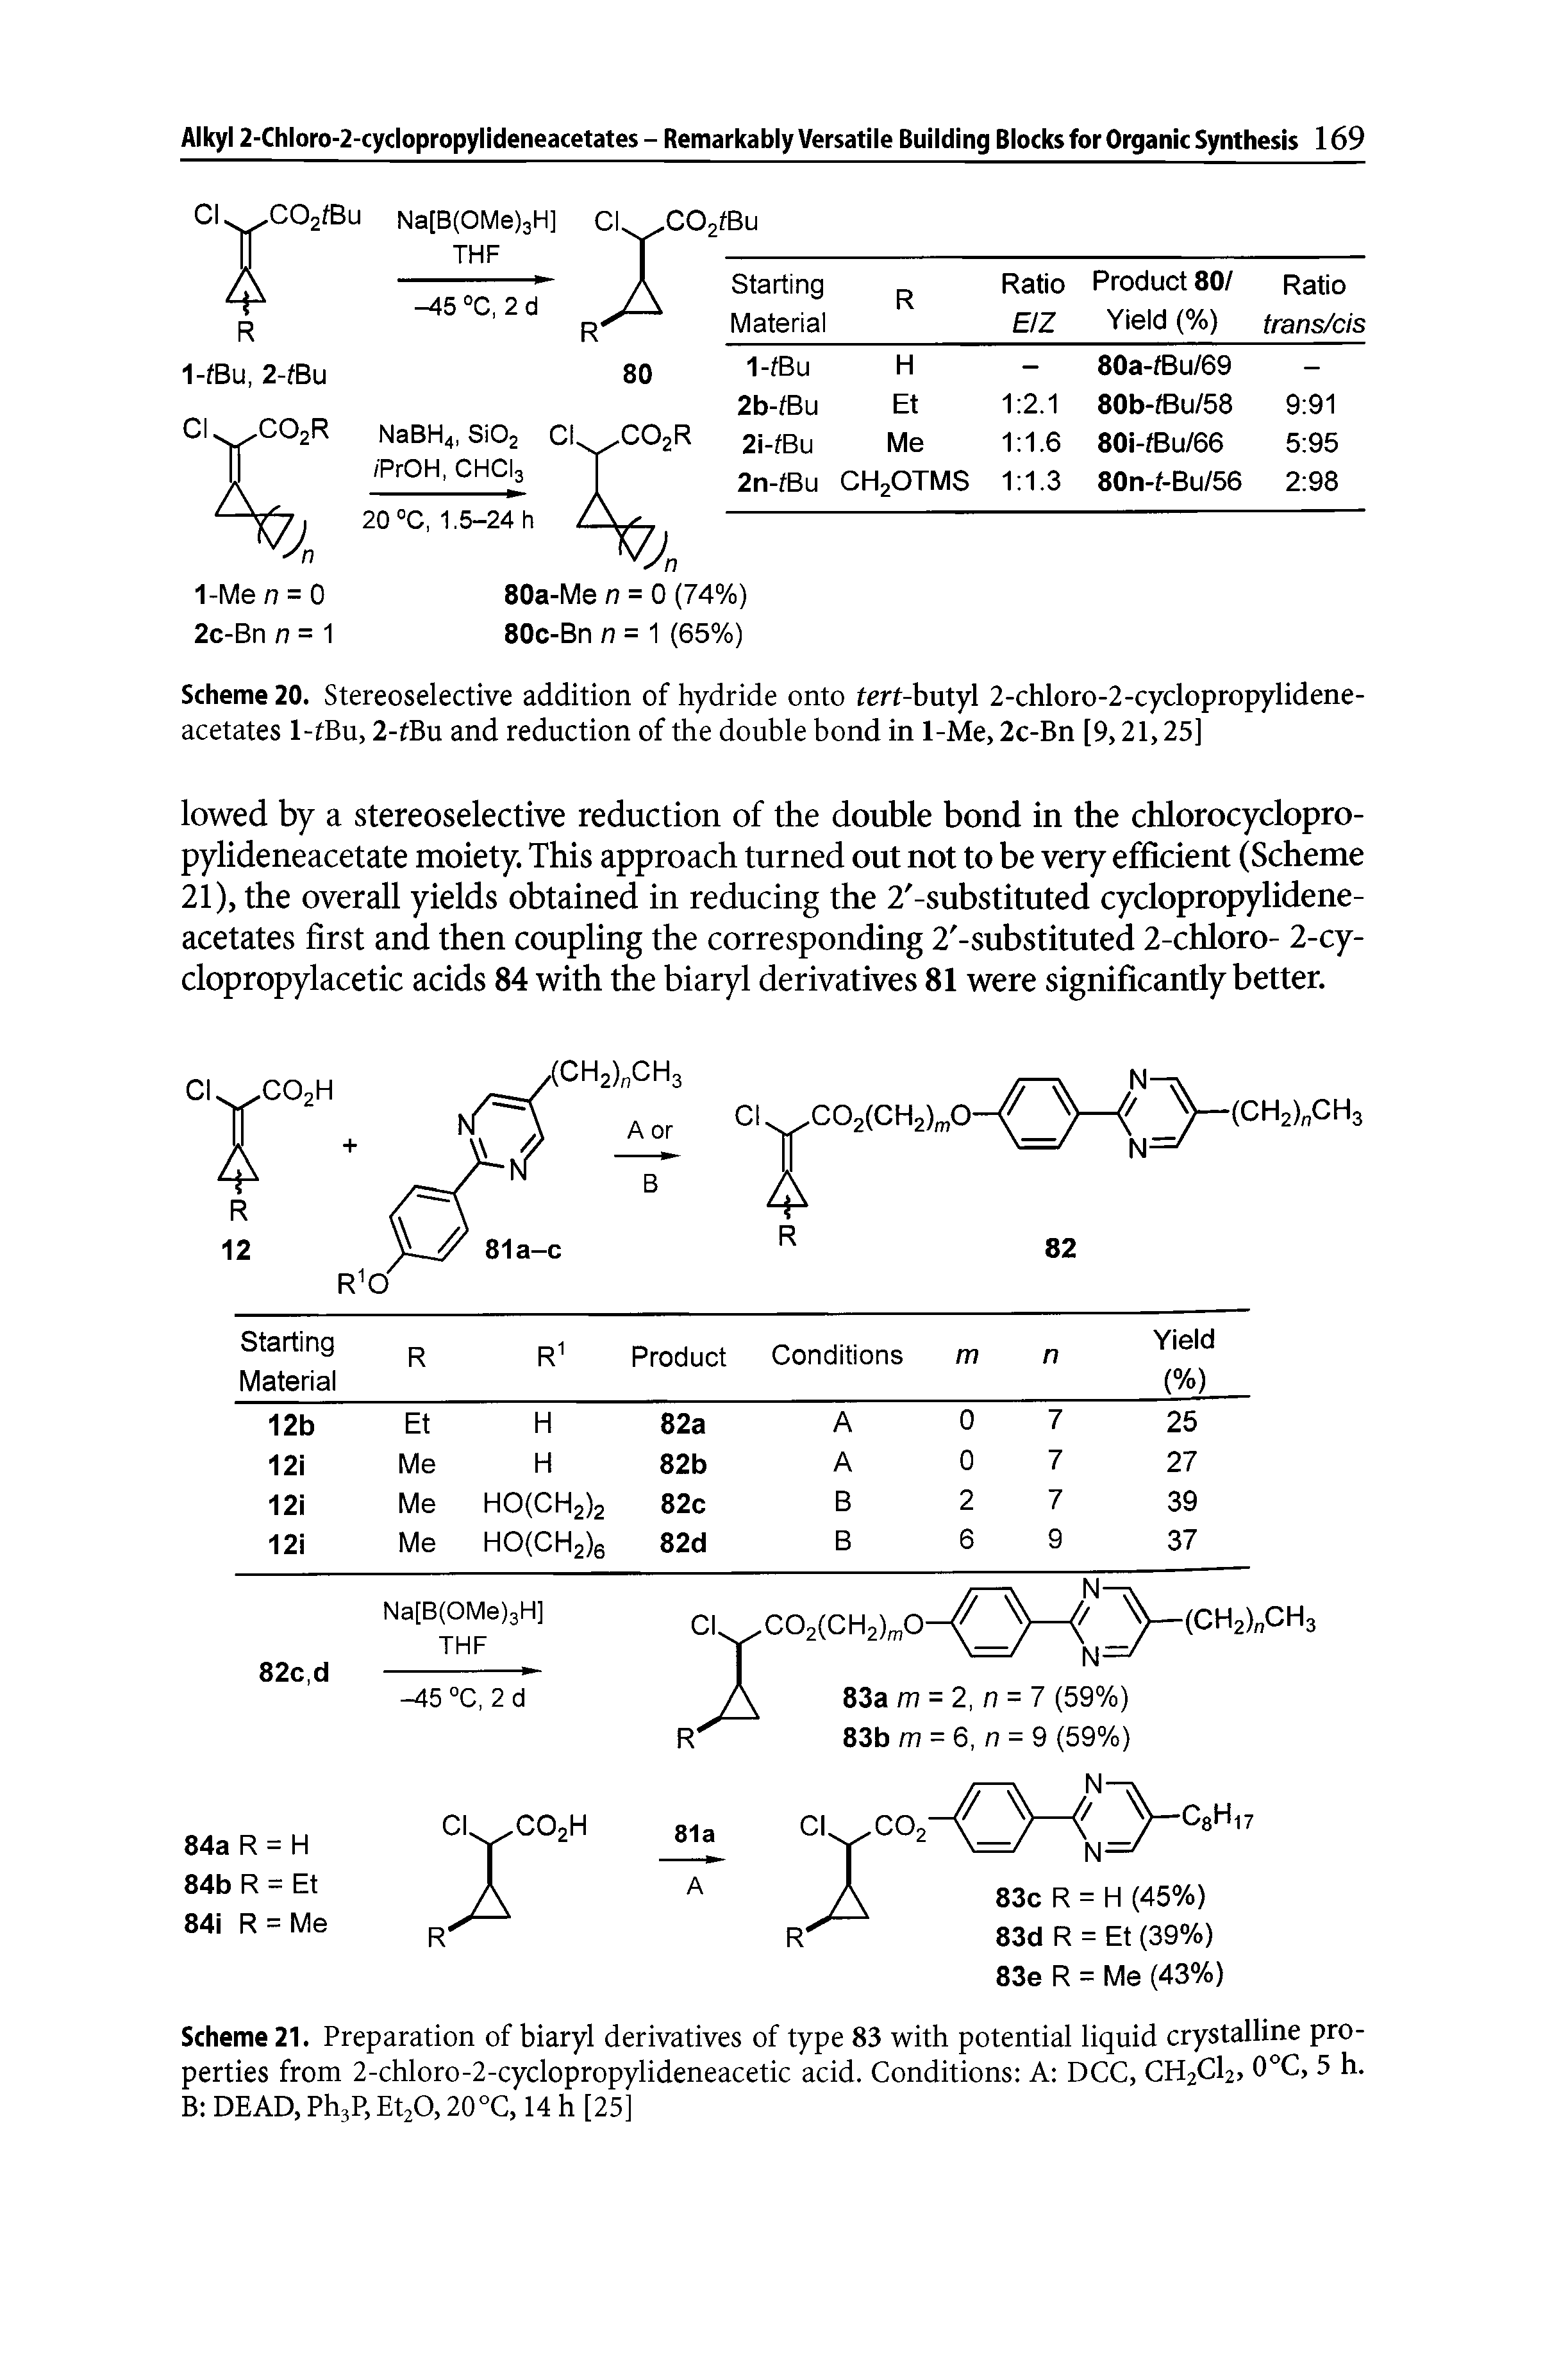 Scheme 21. Preparation of biaryl derivatives of type 83 with potential liquid crystalline properties from 2-chloro-2-cyclopropylideneacetic acid. Conditions A DCC, CH2CI2, 0°C, 5 h. B DEAD, Ph3P, Et20,20°C, 14 h [25]...